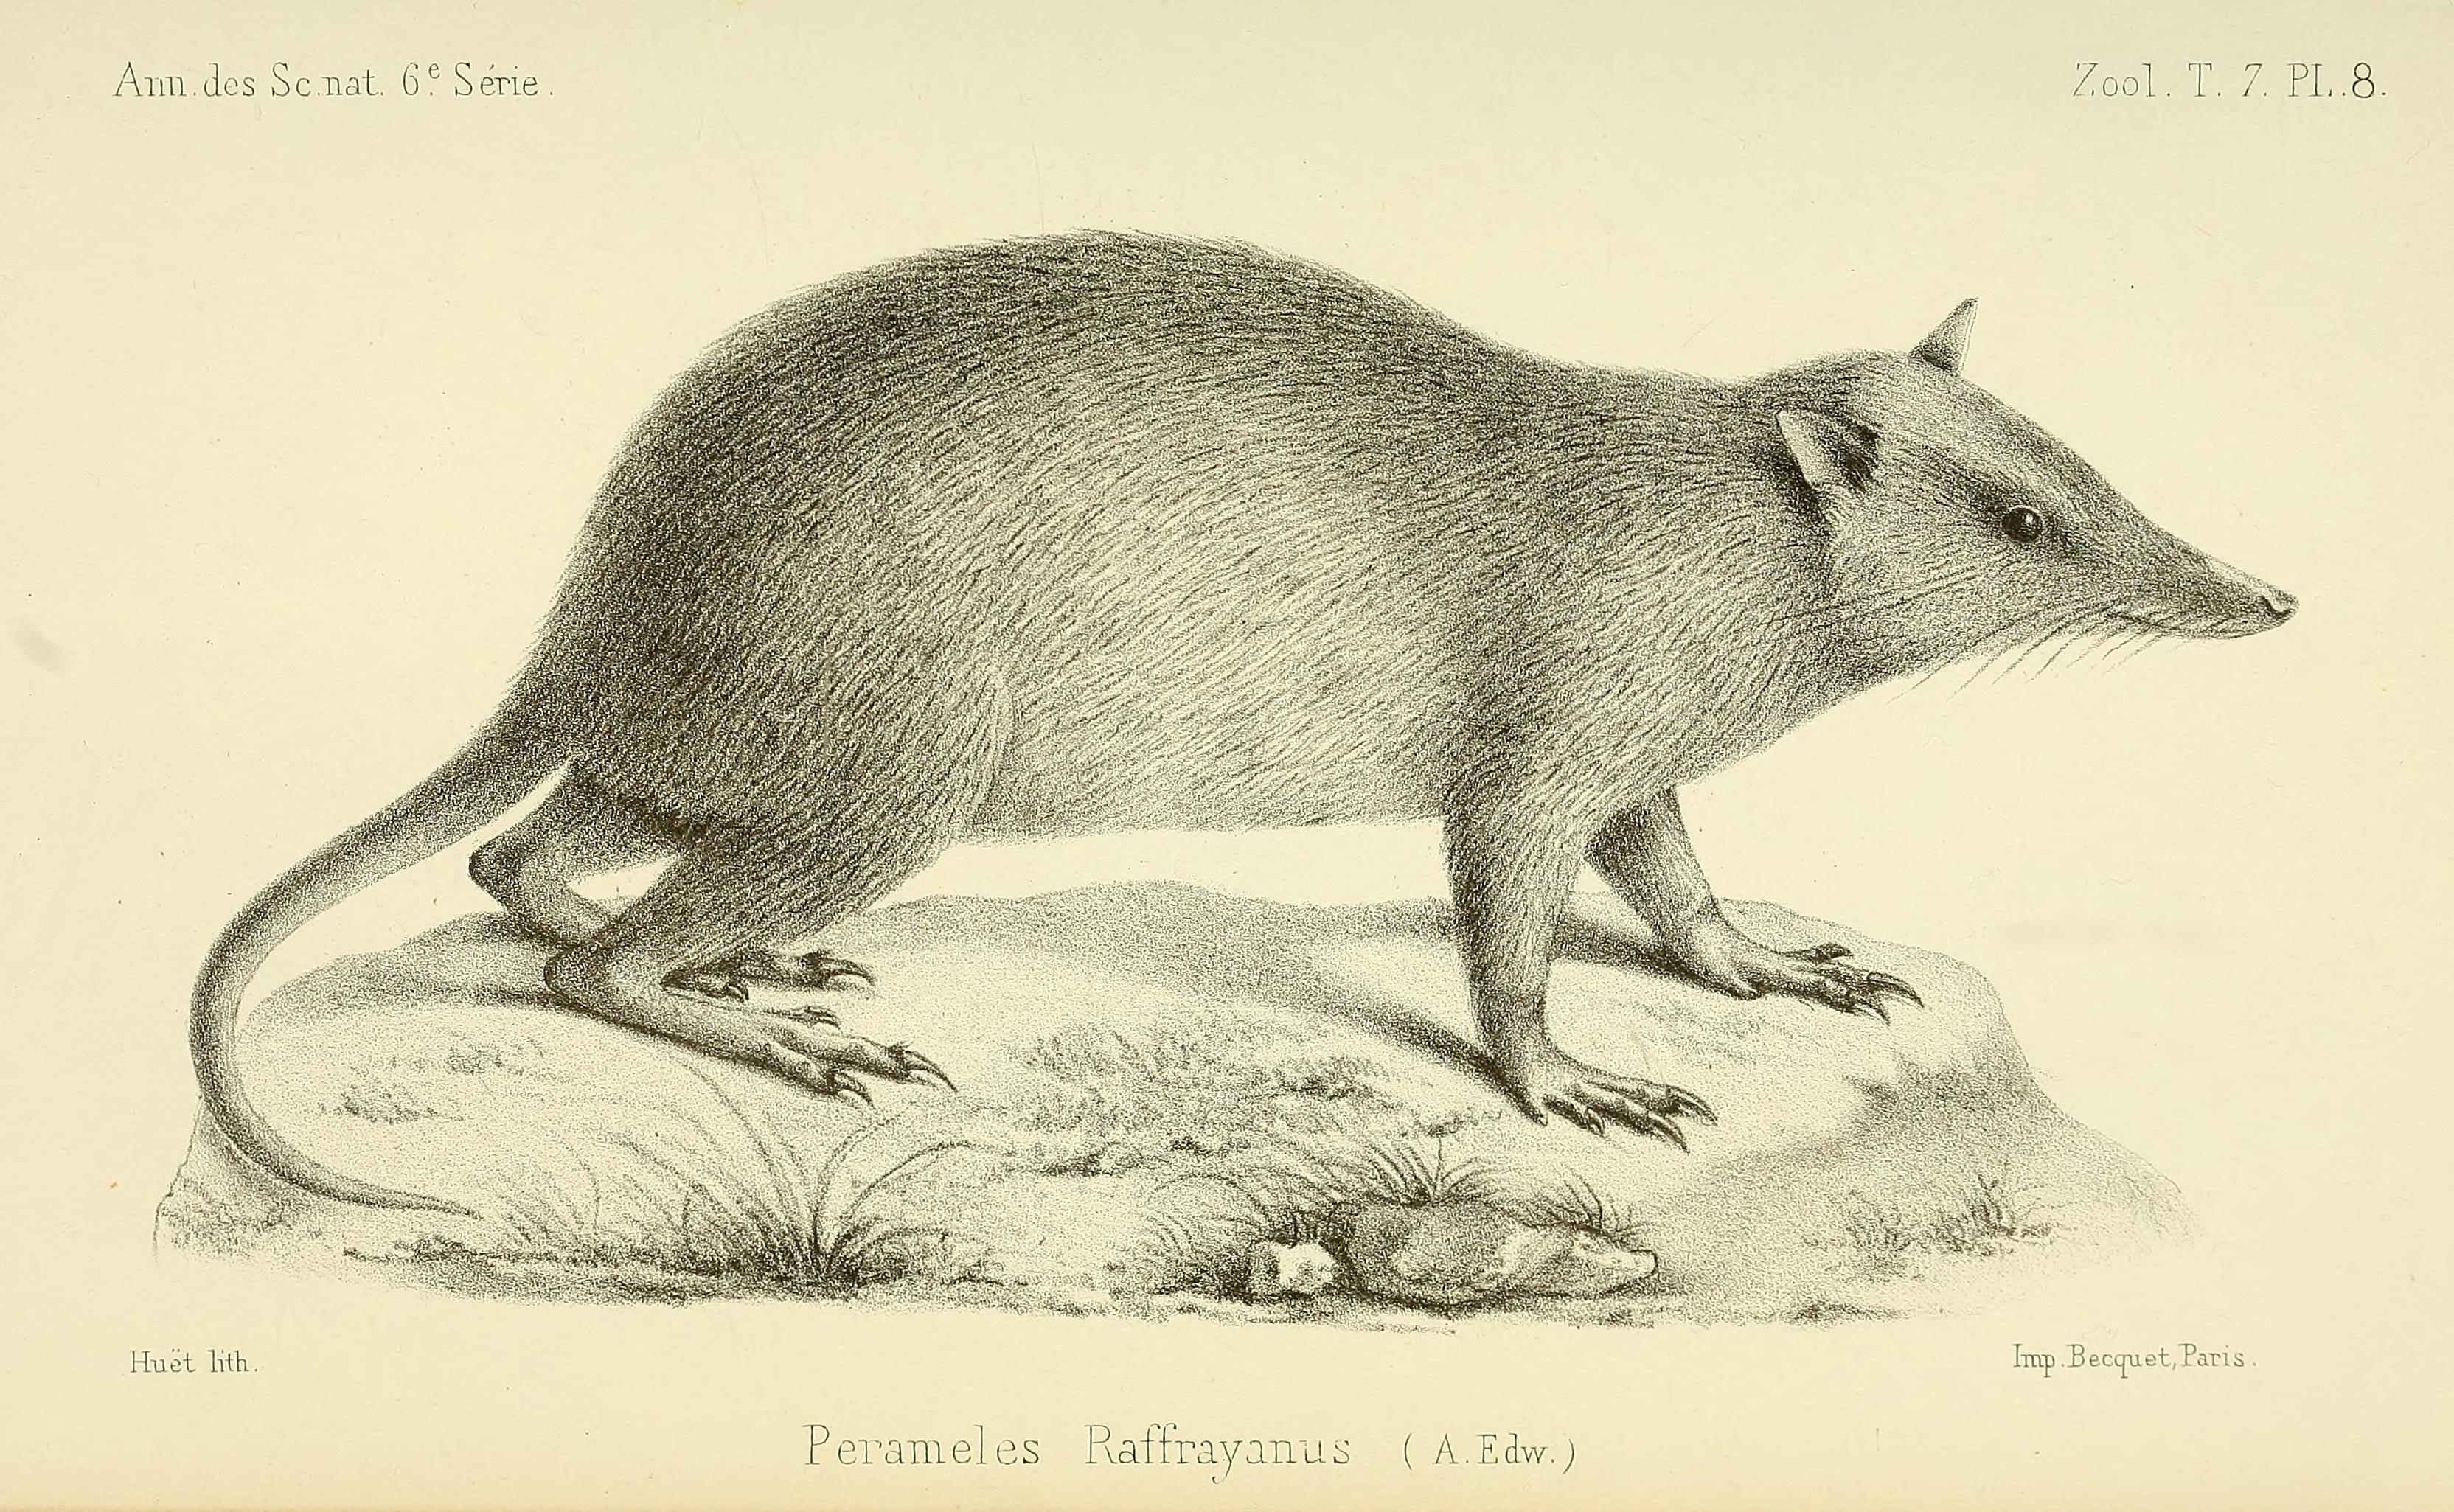 Image of long-nosed bandicoot